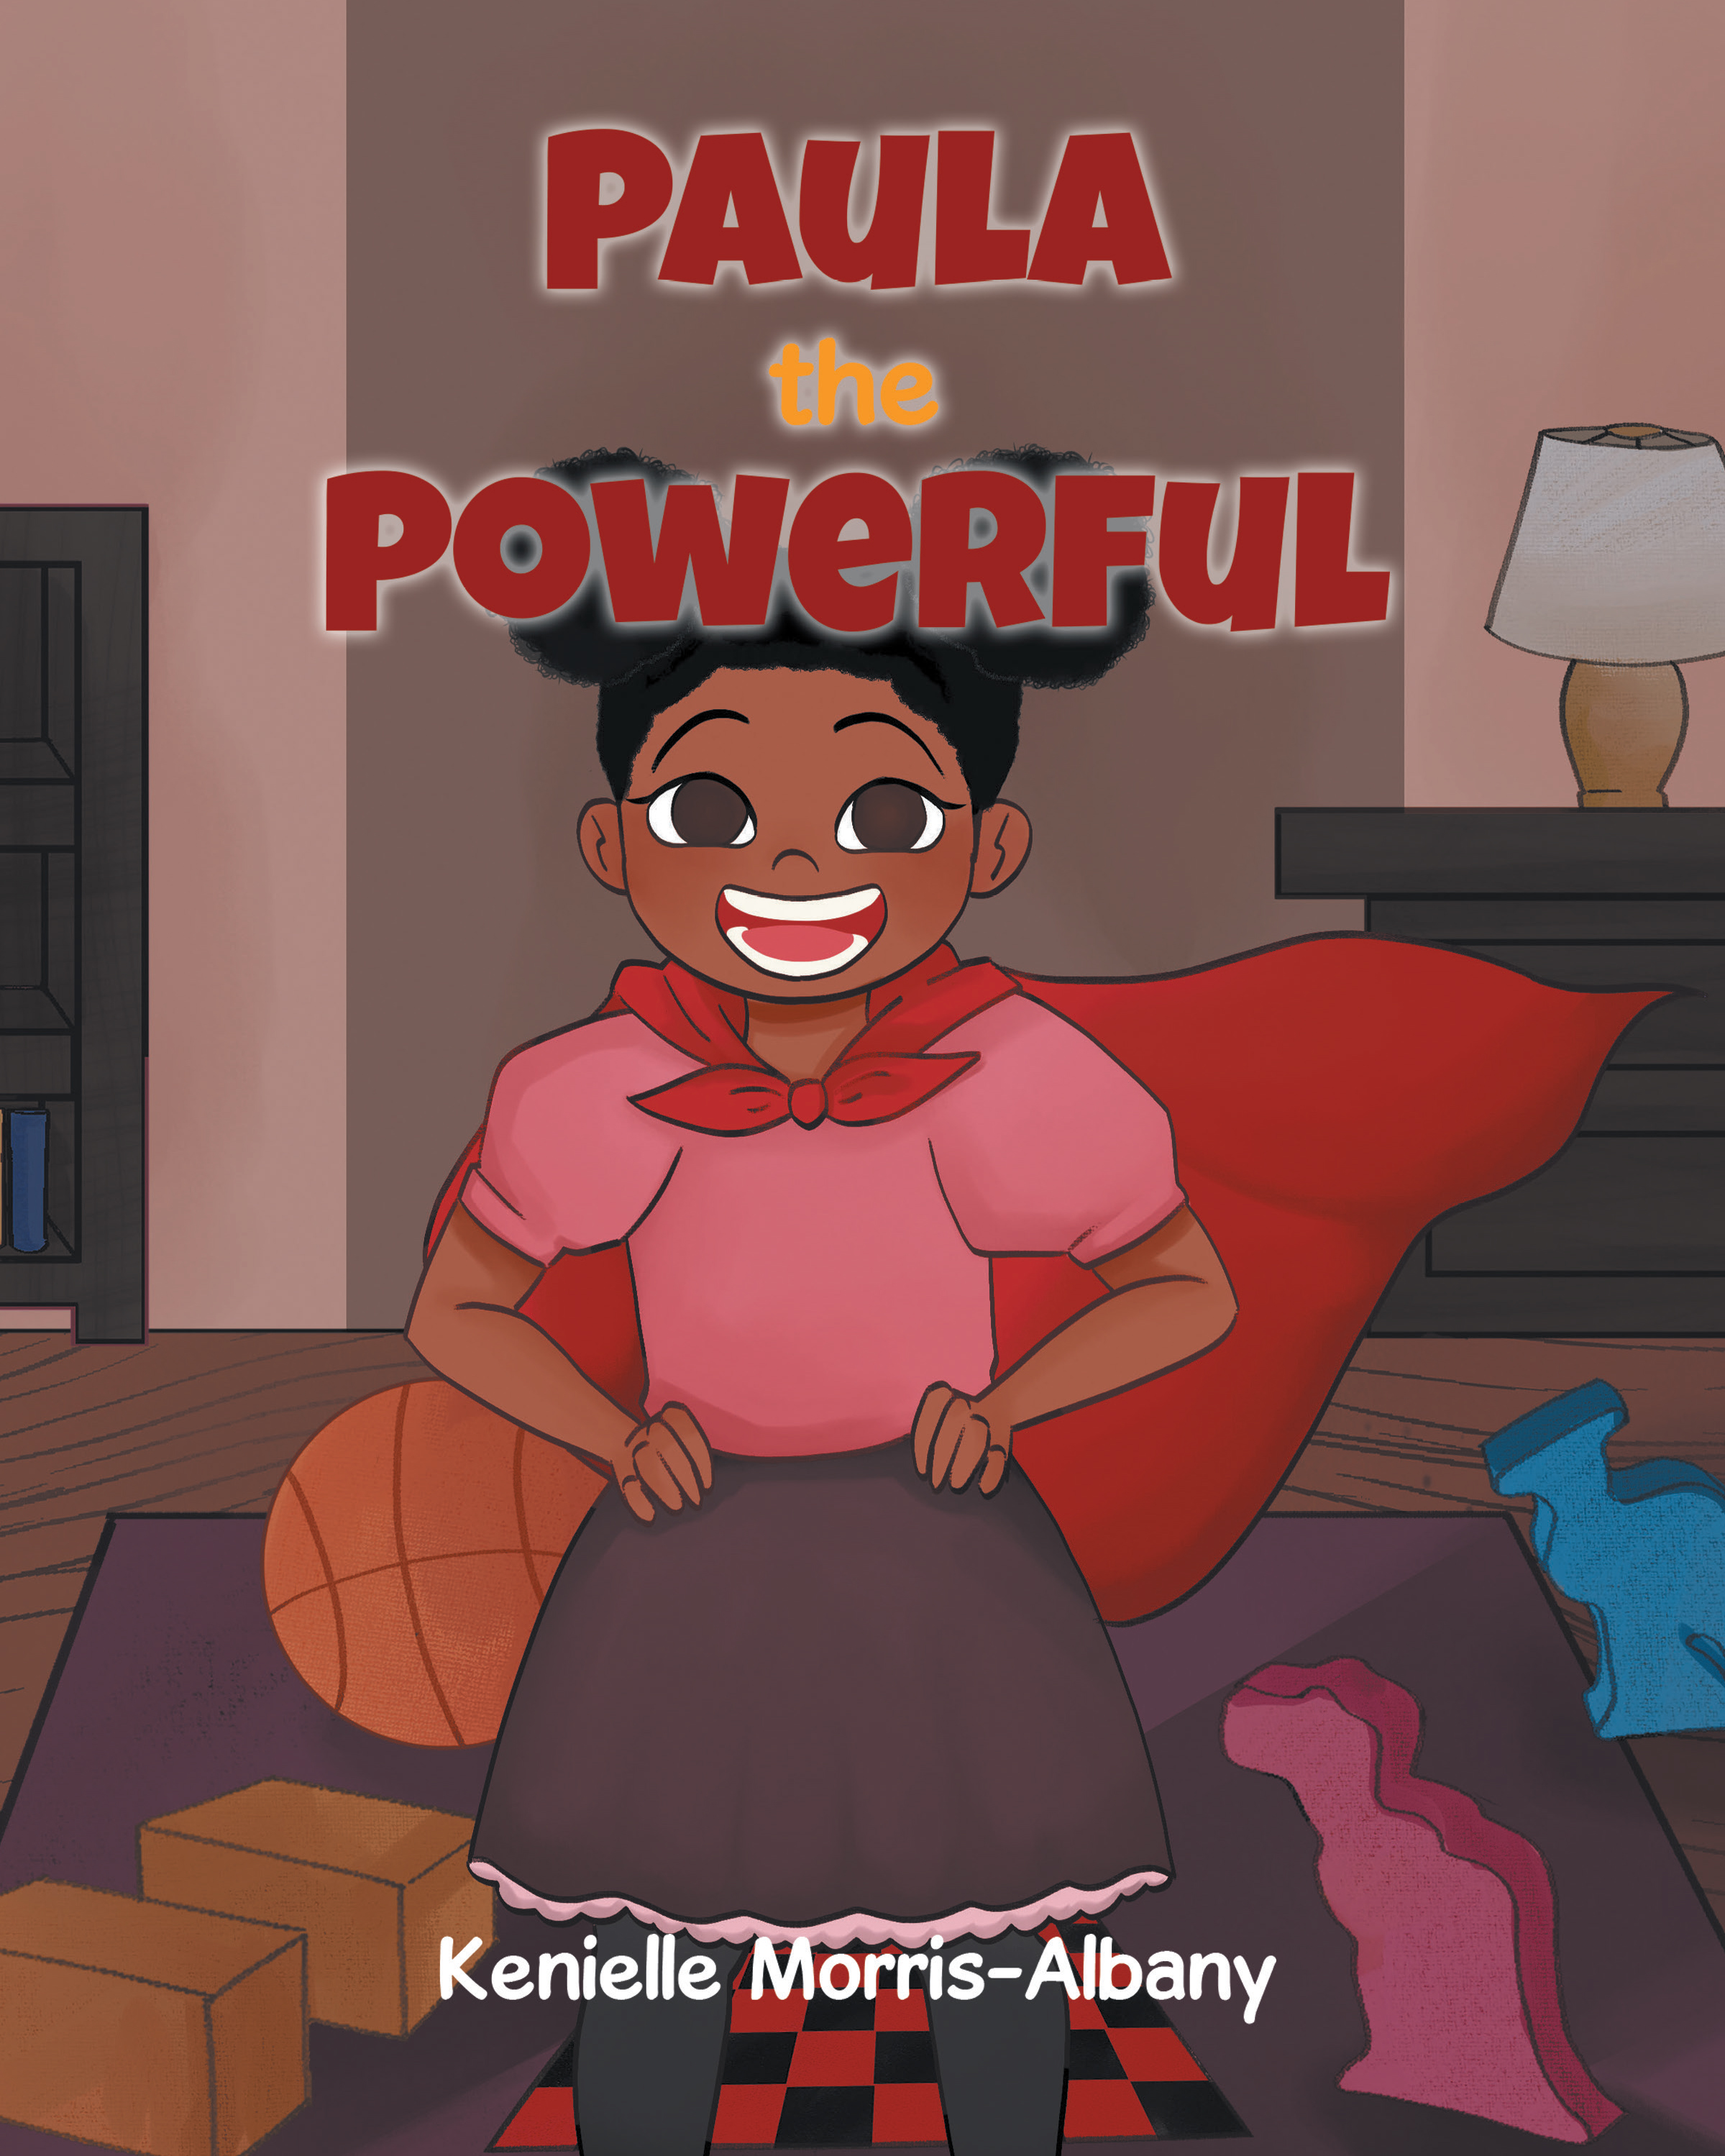 Kenielle Morris-Albany’s New Book, "Paula the Powerful," is a Charming Story of a Young Girl Who Learns to Stand Up Against Bullies and Become a Champion of Kindness